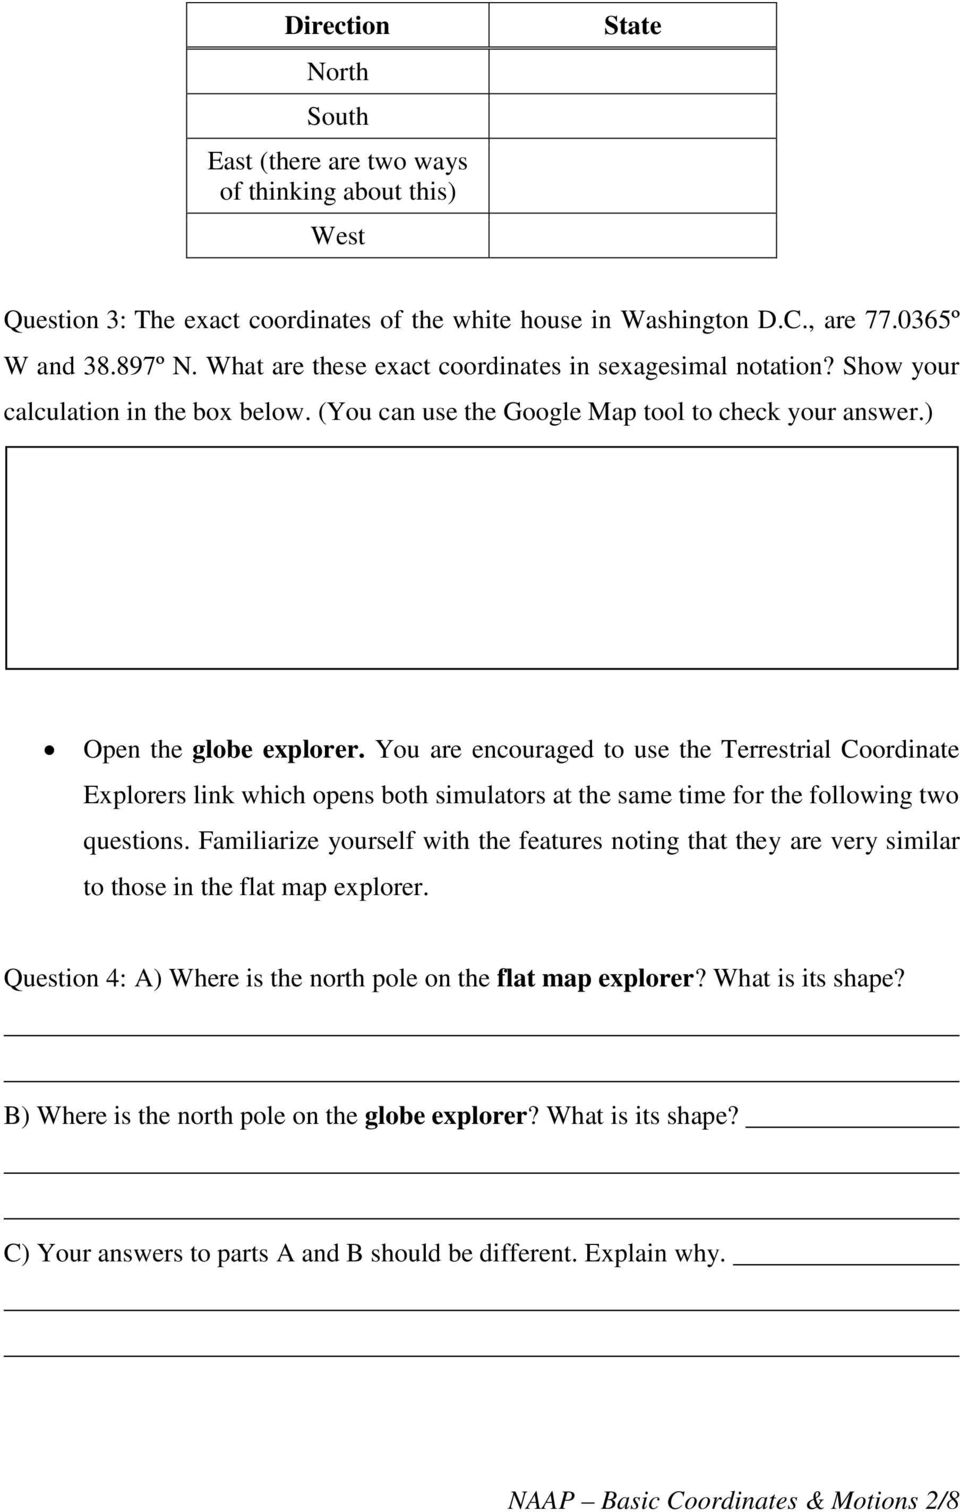 You are encouraged to use the Terrestrial Coordinate Explorers link which opens both simulators at the same time for the following two questions.